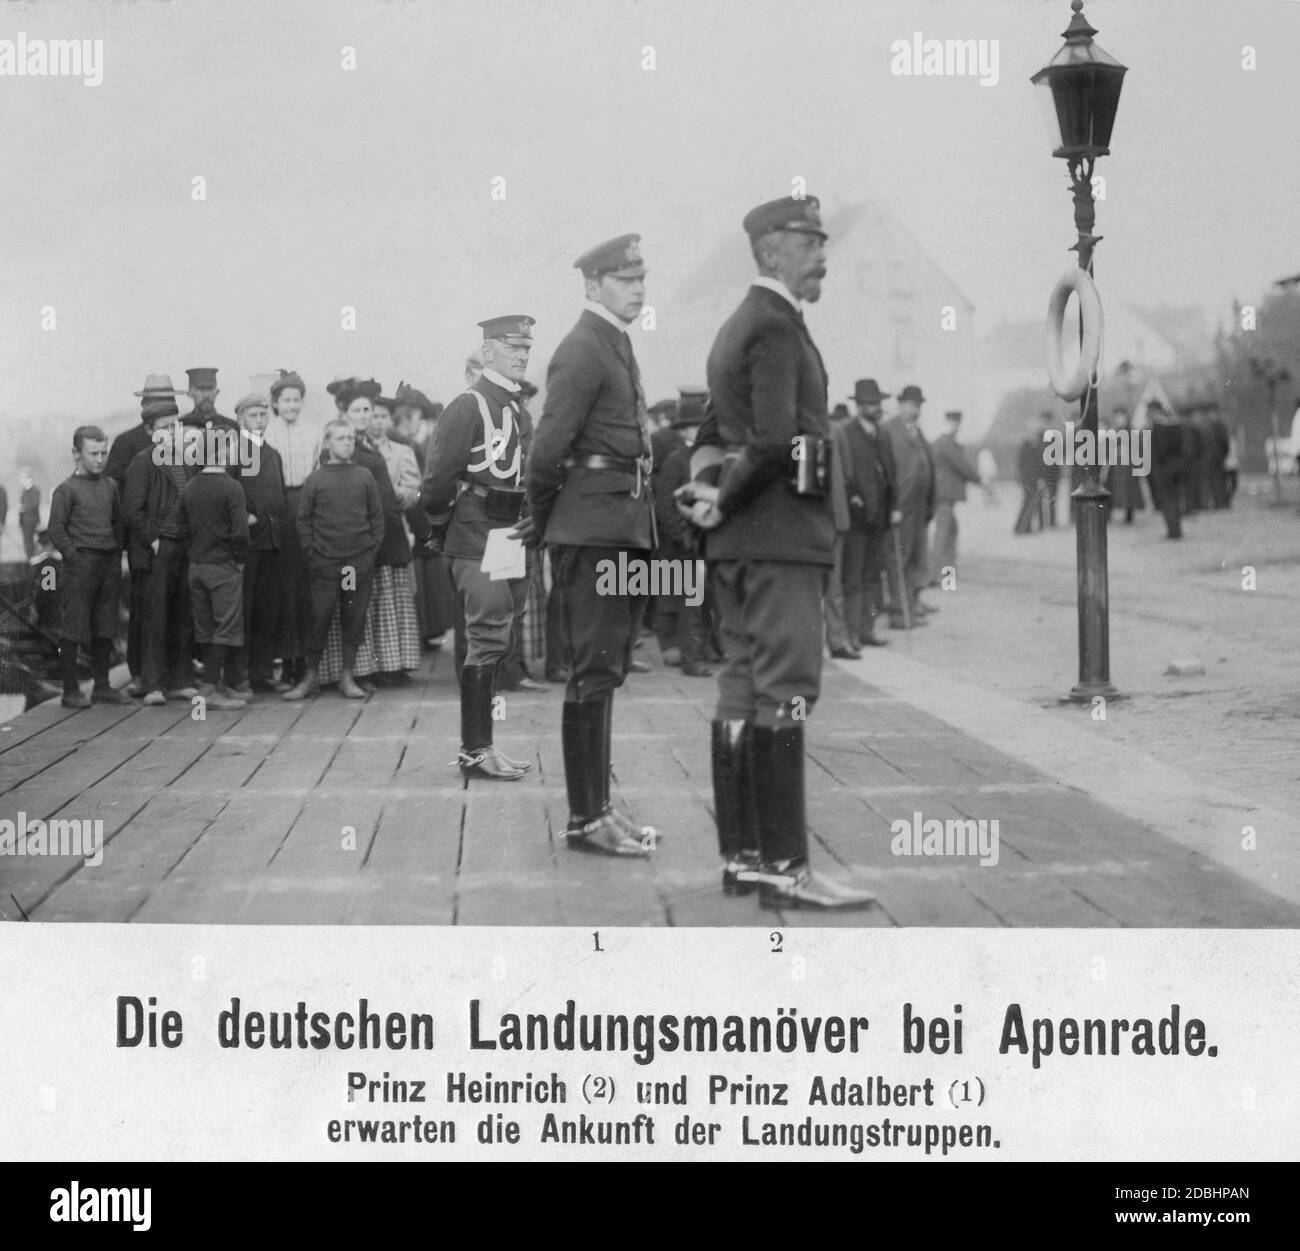 Admiral Prince Henry of Prussia (right) and Prince Adalbert of Prussia (centre) await the arrival of the landing troops at Apenrade (now Aabenraa in Denmark) during the landing manoeuvre of the Imperial Navy in 1907. Stock Photo